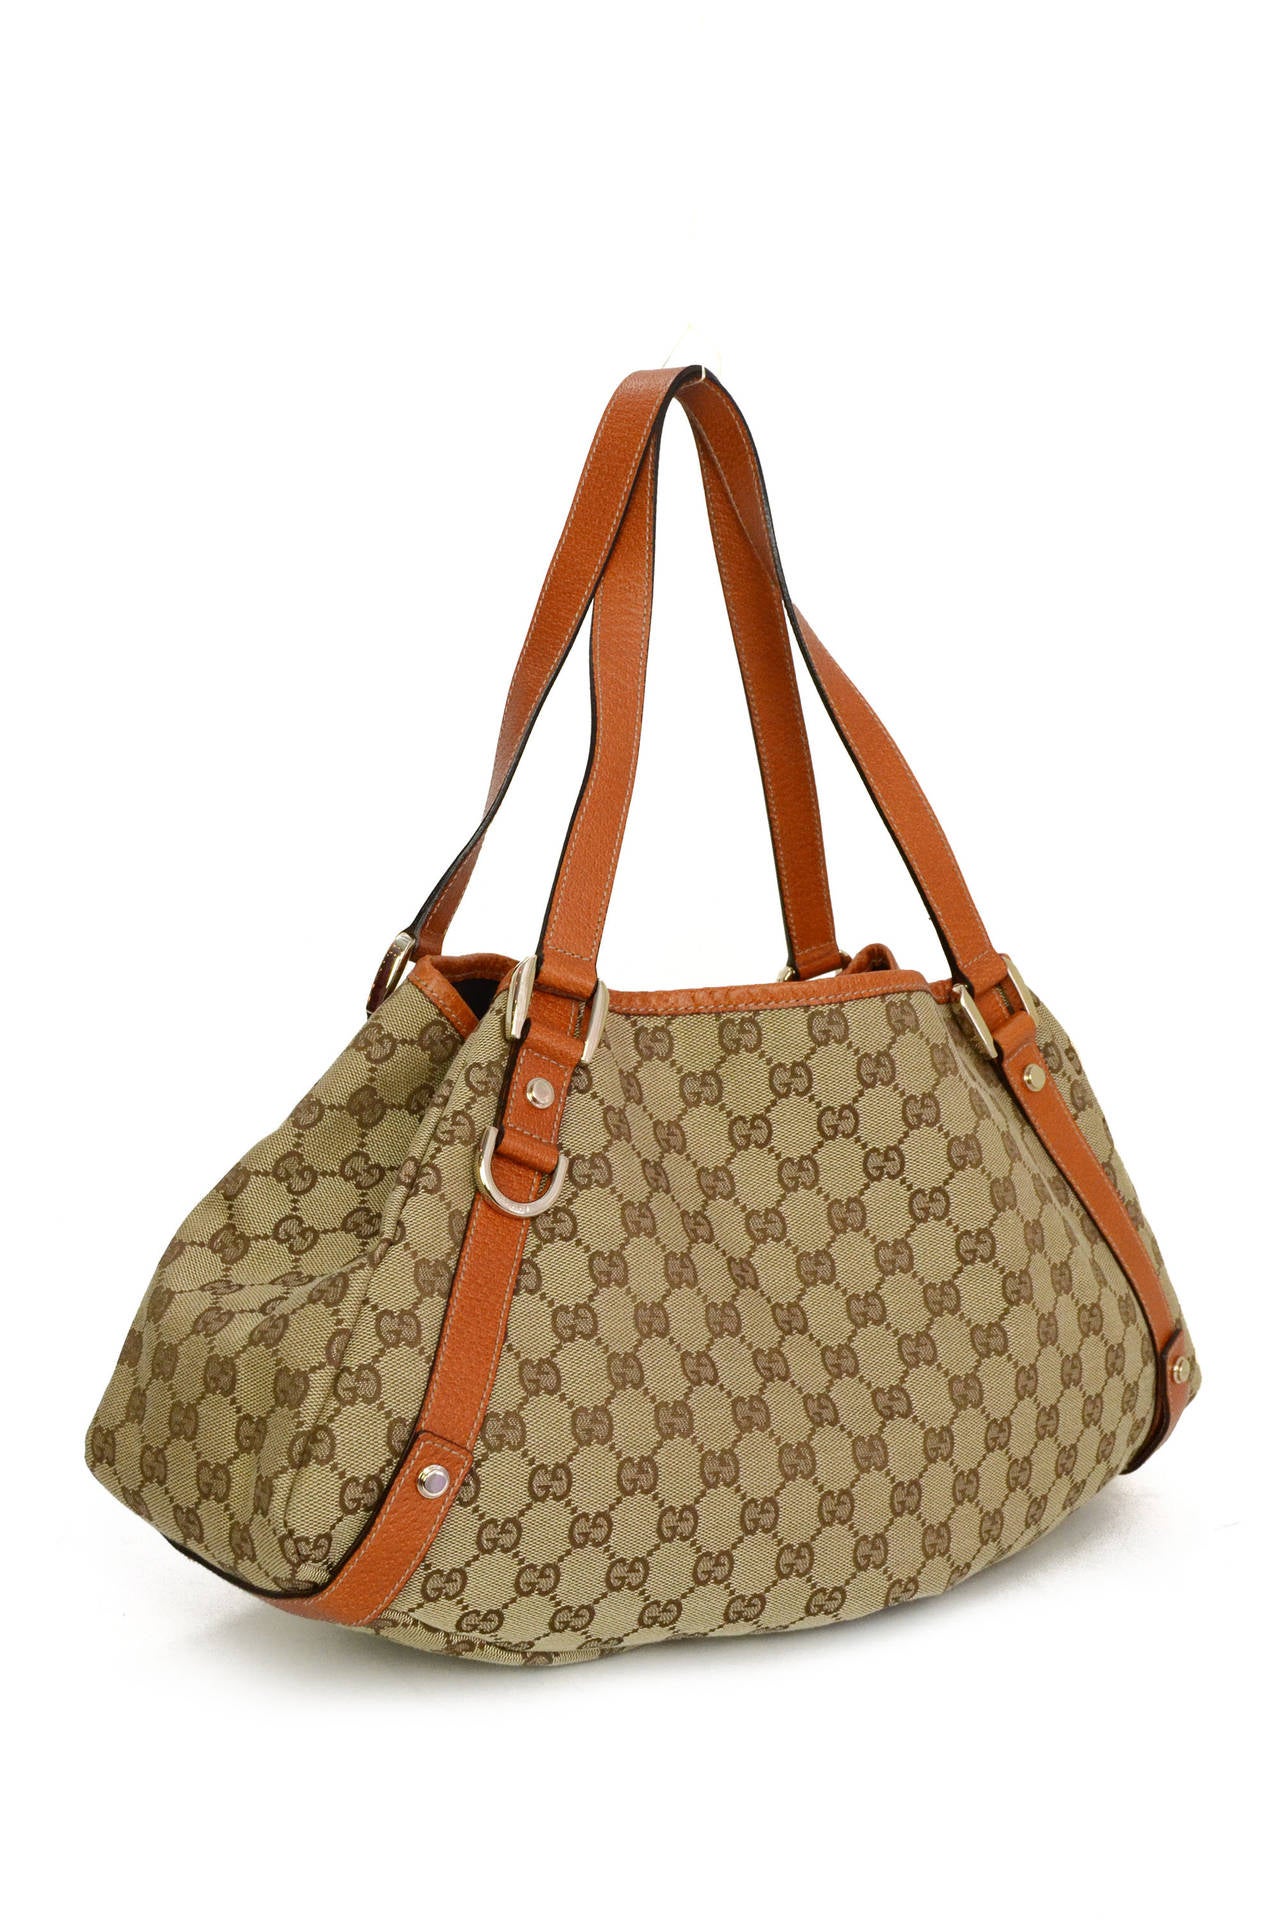 GUCCI Monogram Canvas and Orange Leather Tote Bag GHW at 1stdibs